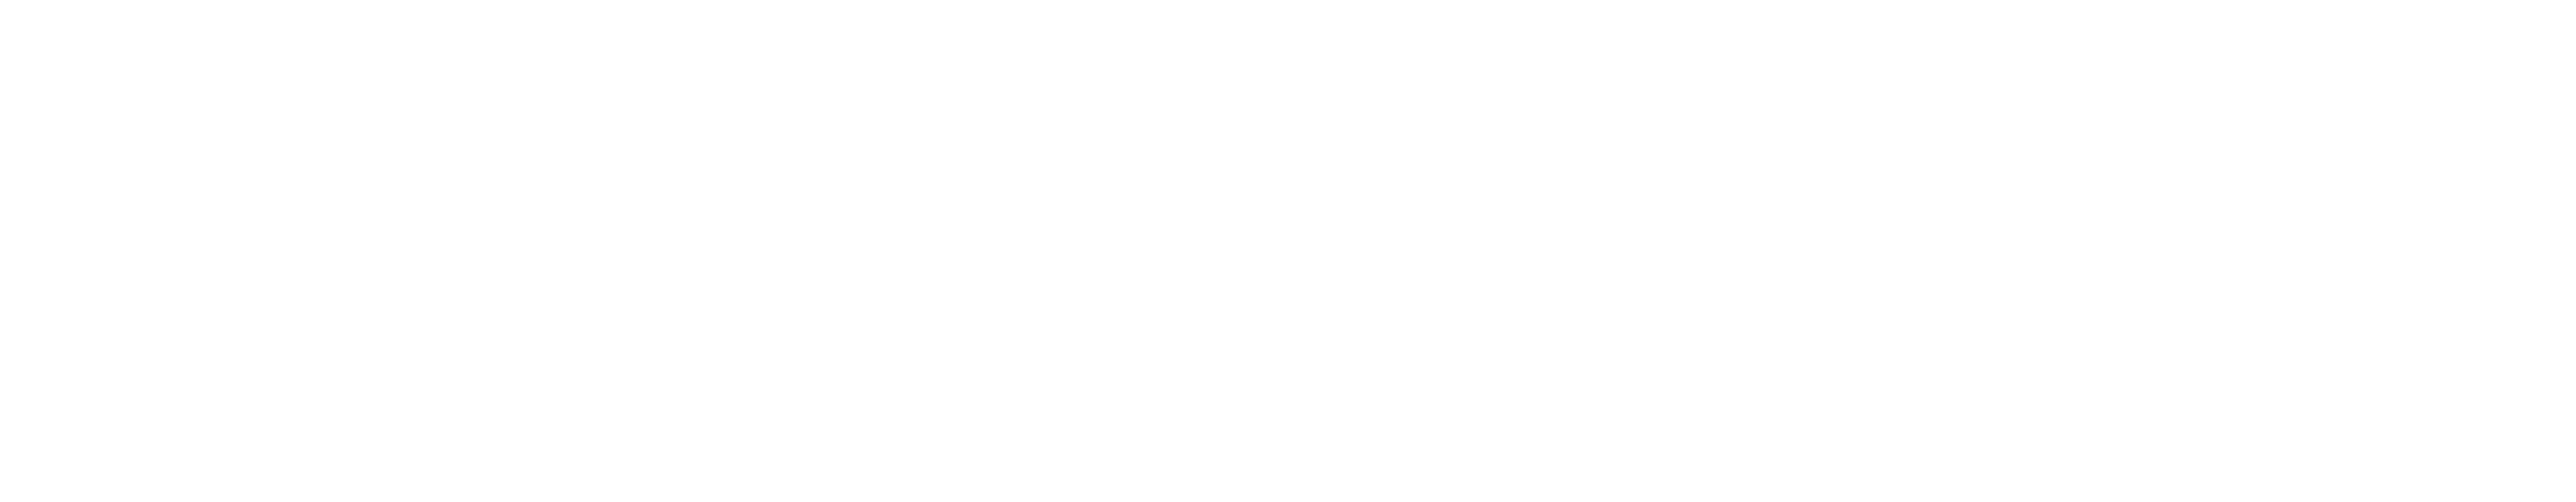 FS-ISAC Seal - Early-Stage Affiliate